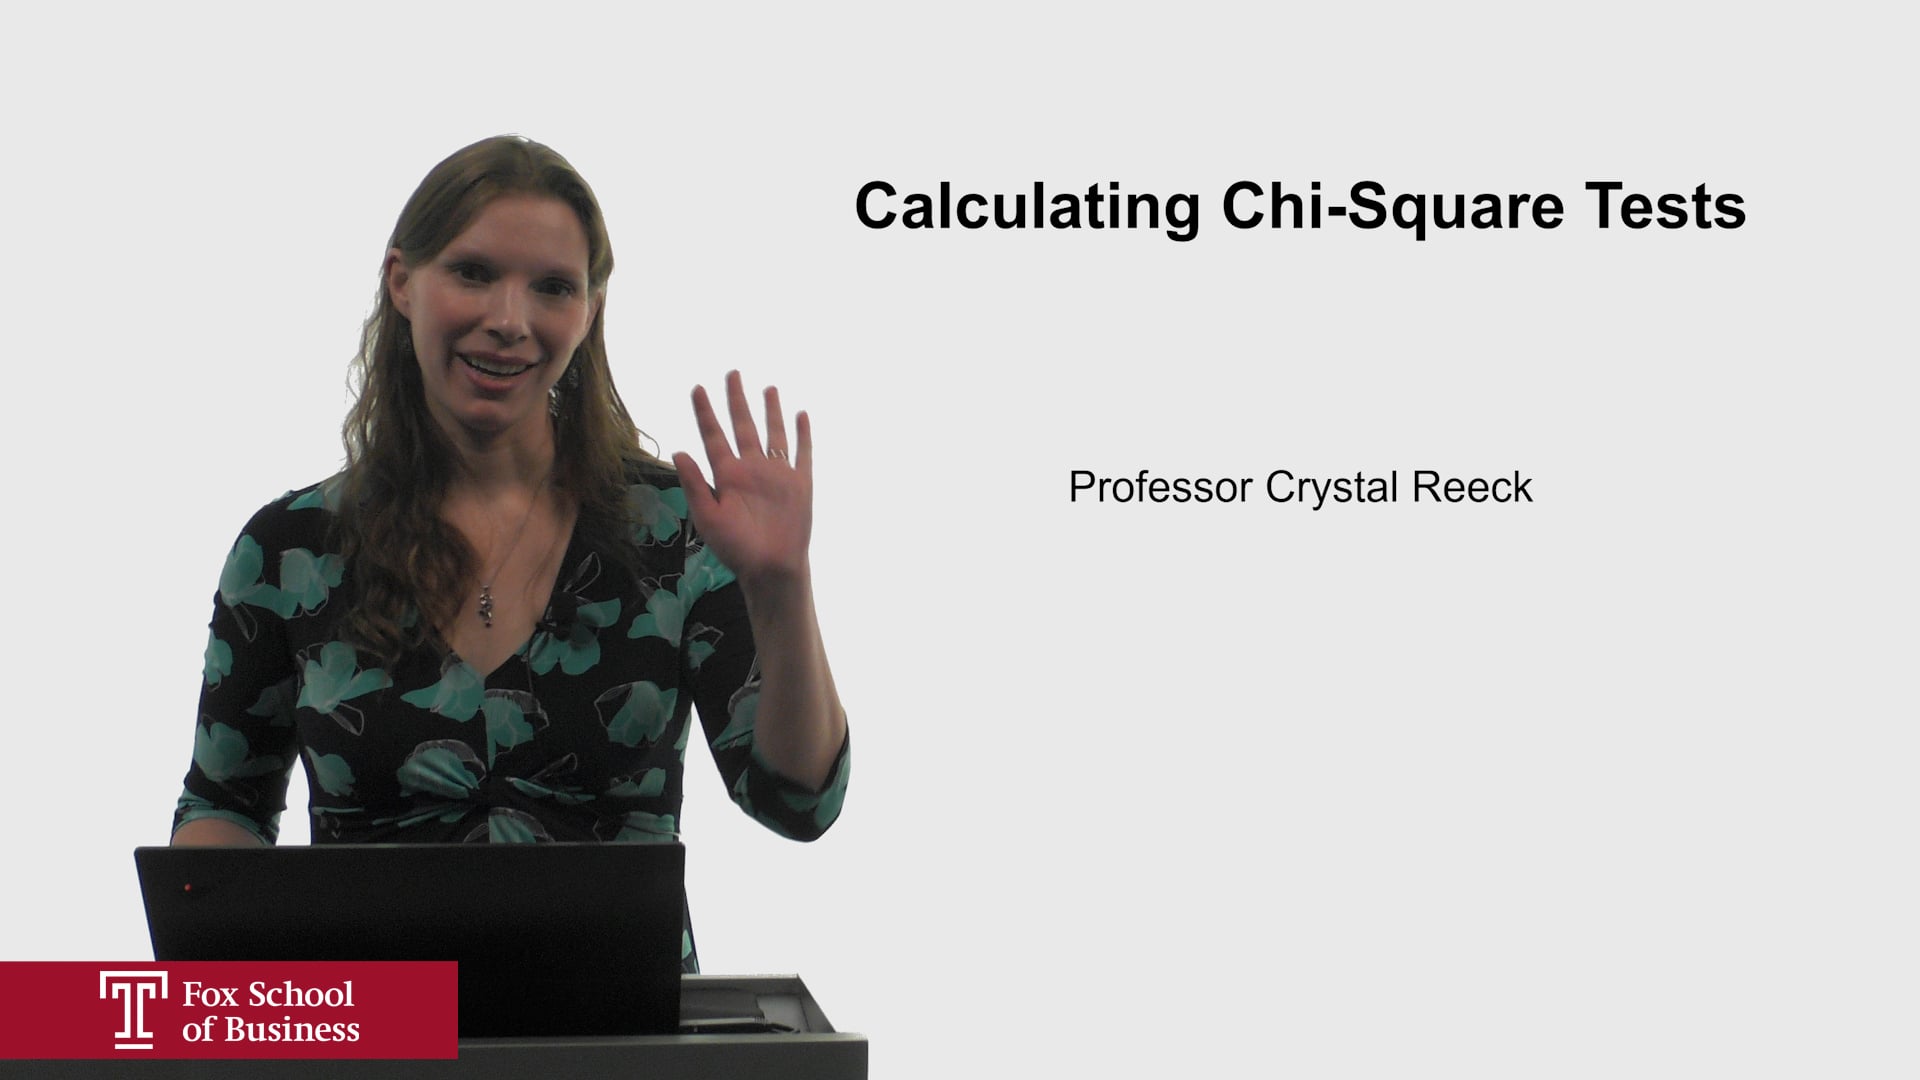 Calculating Chi-Square Tests